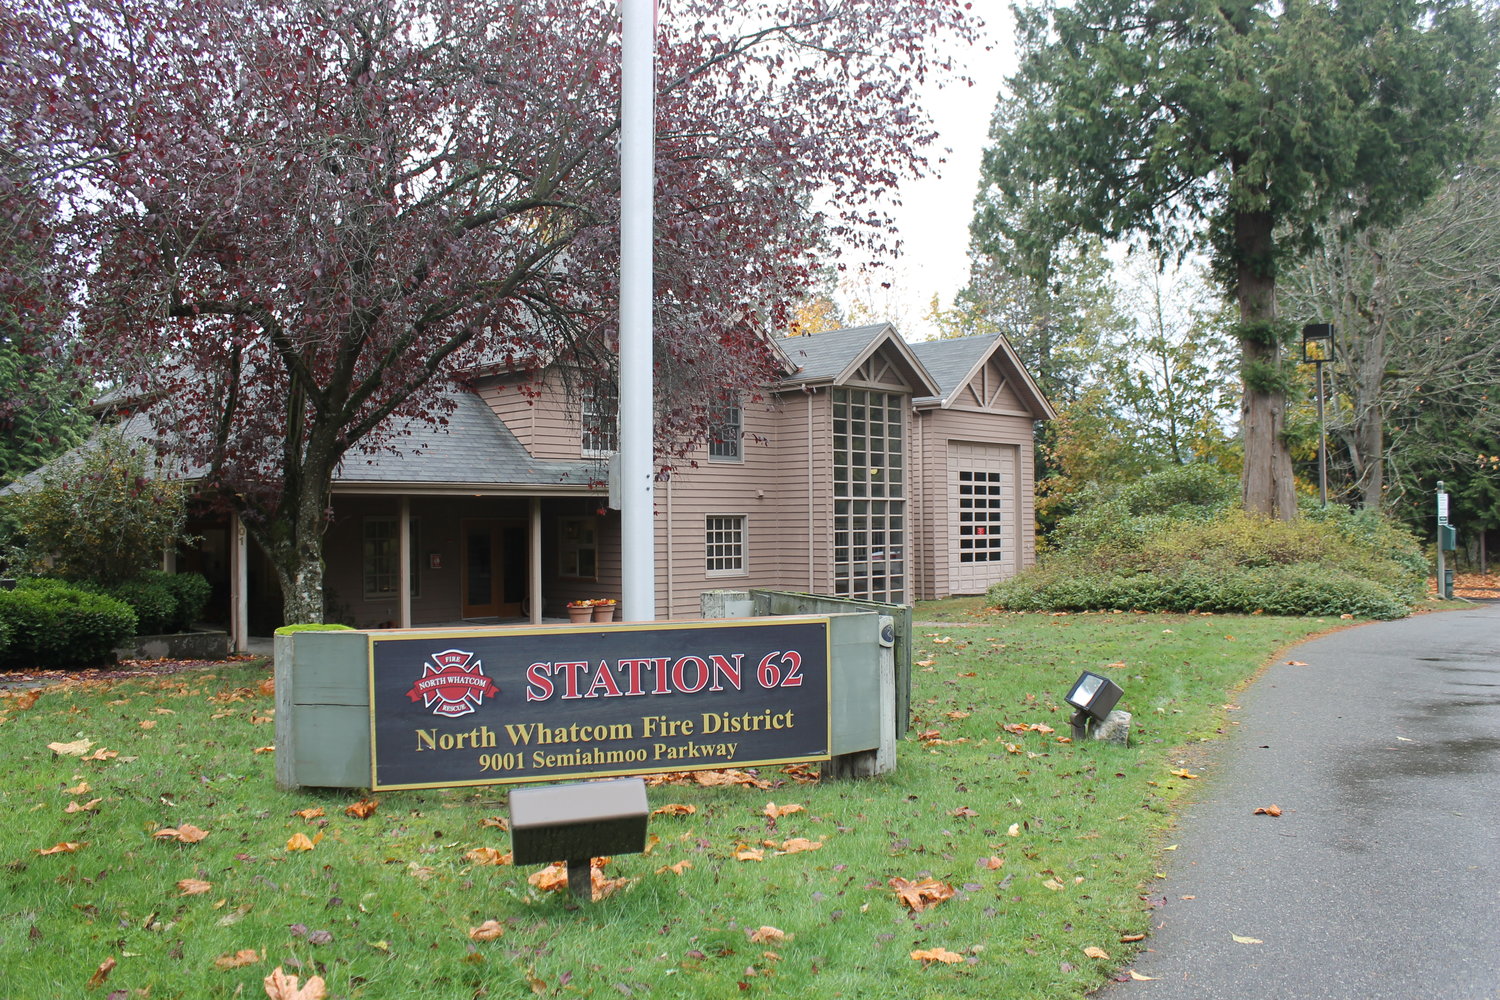 North Whatcom Fire and Rescue’s Station 62 on Semiahmoo Parkway.